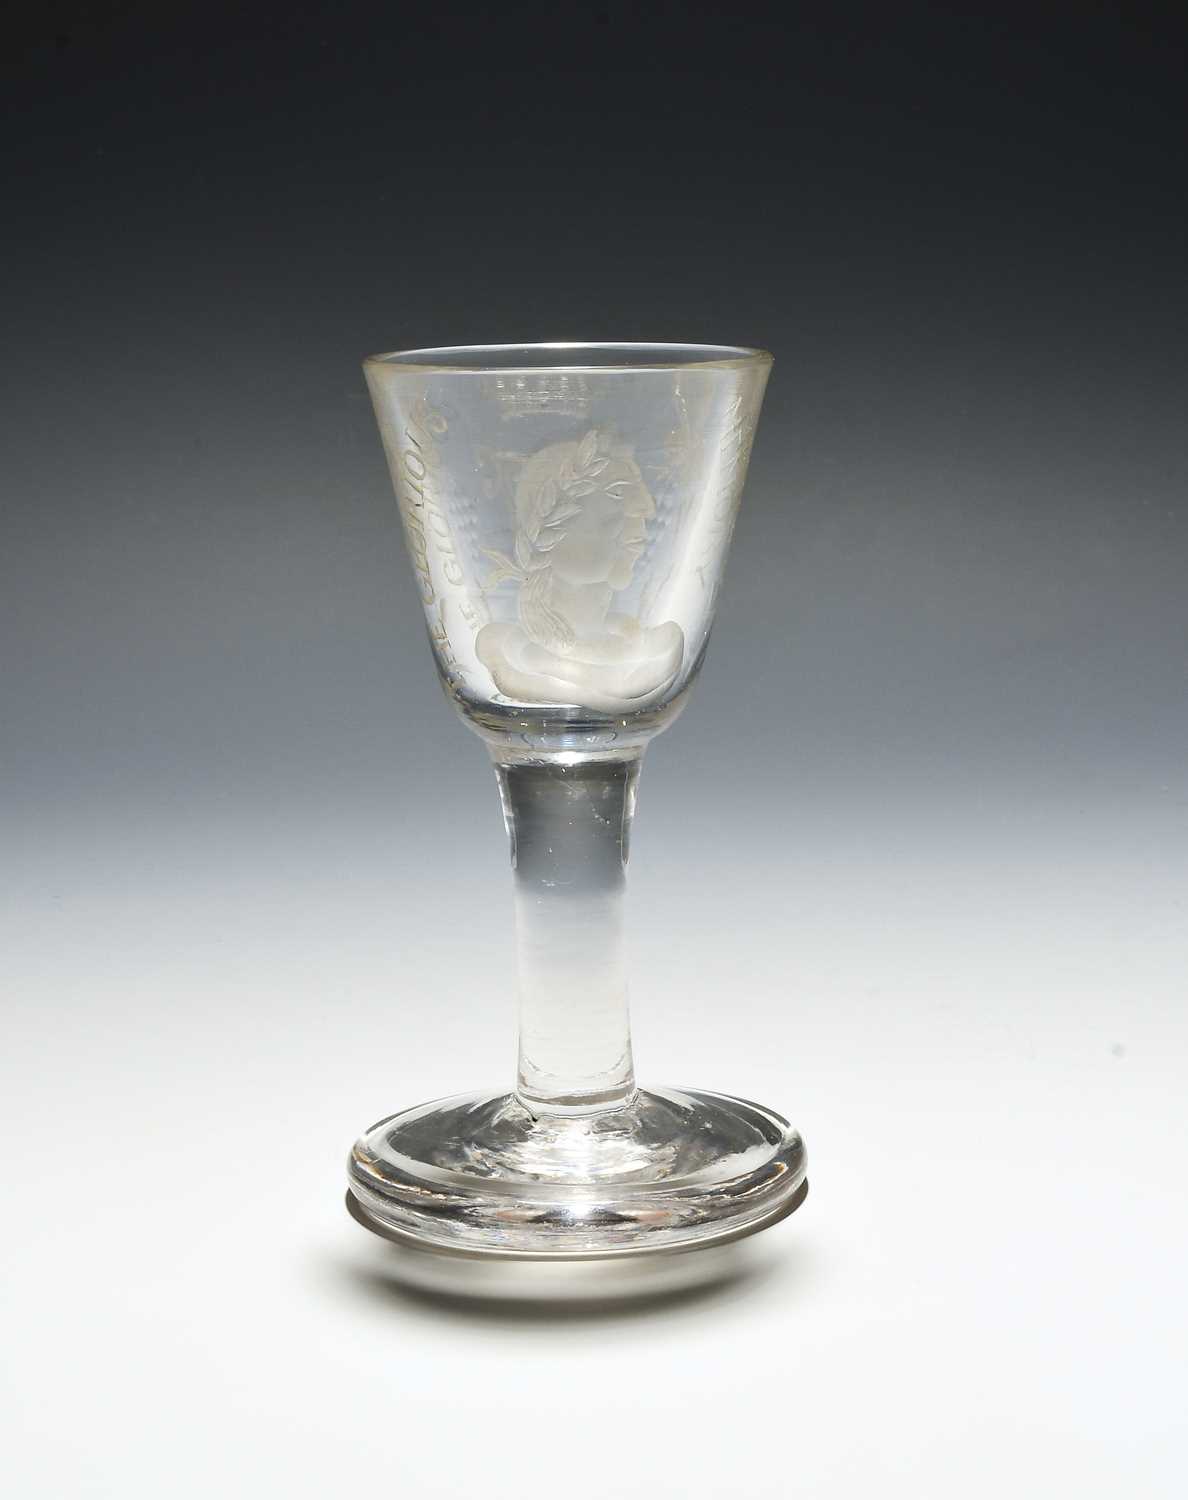 A Williamite firing glass, c.1760, engraved with a portrait of the King within the inscription '